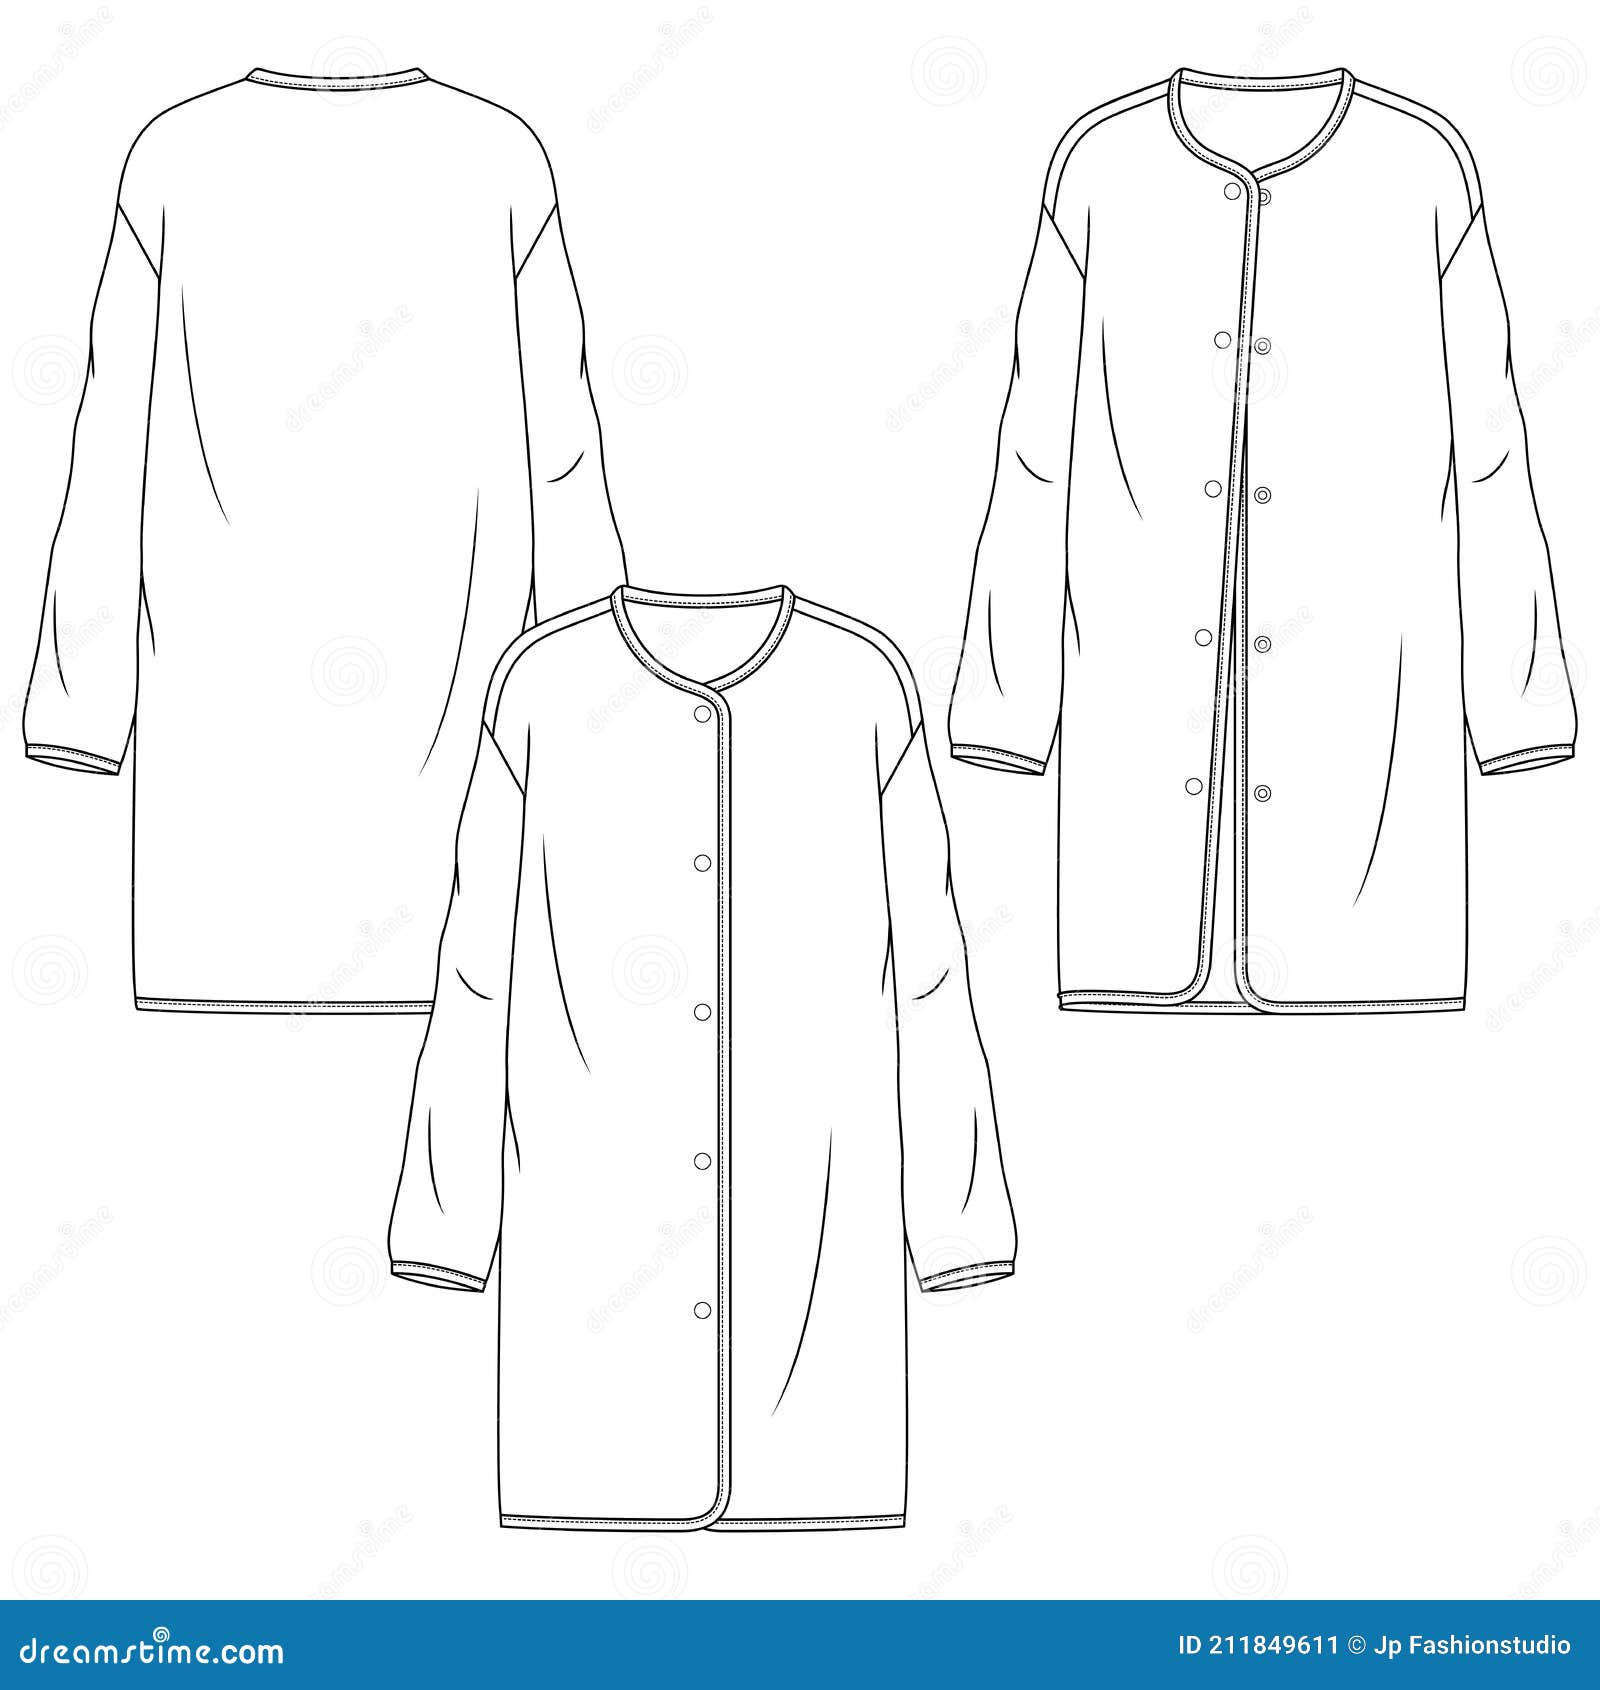 How to draw quilting on a fashion flat sketch of an outerwear jacket -  YouTube